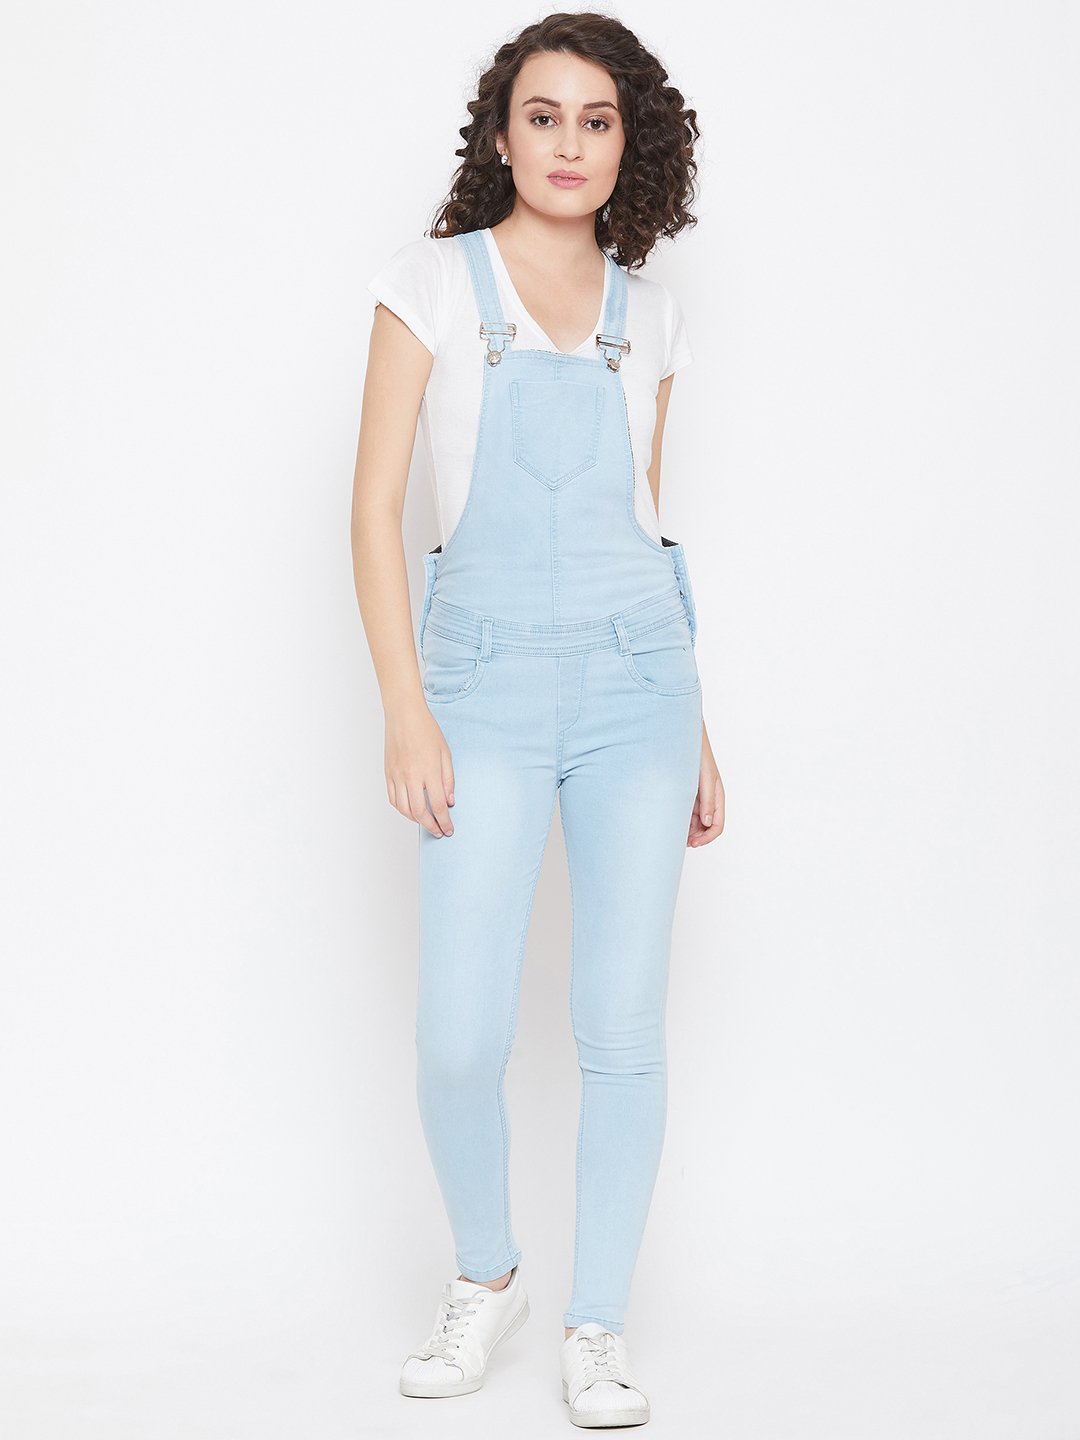 Slim Fit Stretchable Sky Blue Dungarees - NiftyJeans